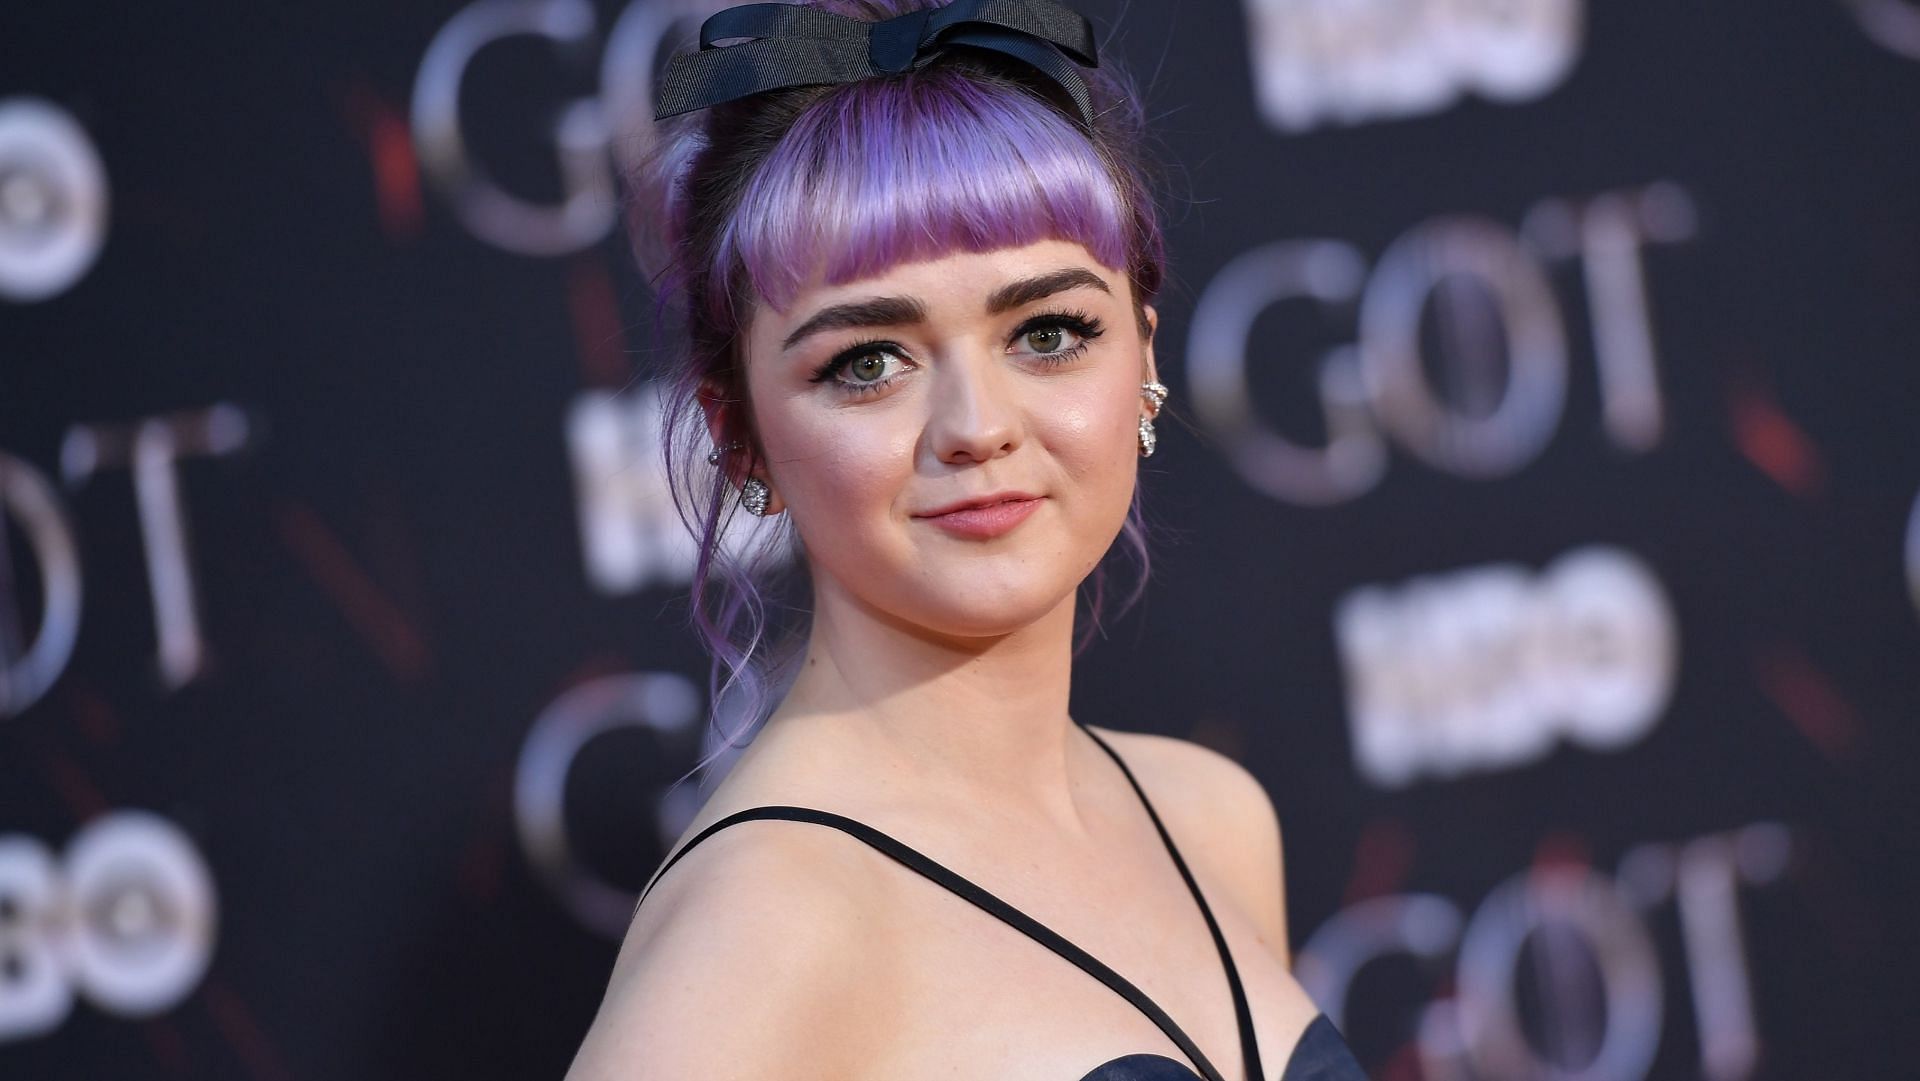 Maisie Williams revealed having mental health issues because of her past experiences. (Image via Angela Weiss/Getty Images)